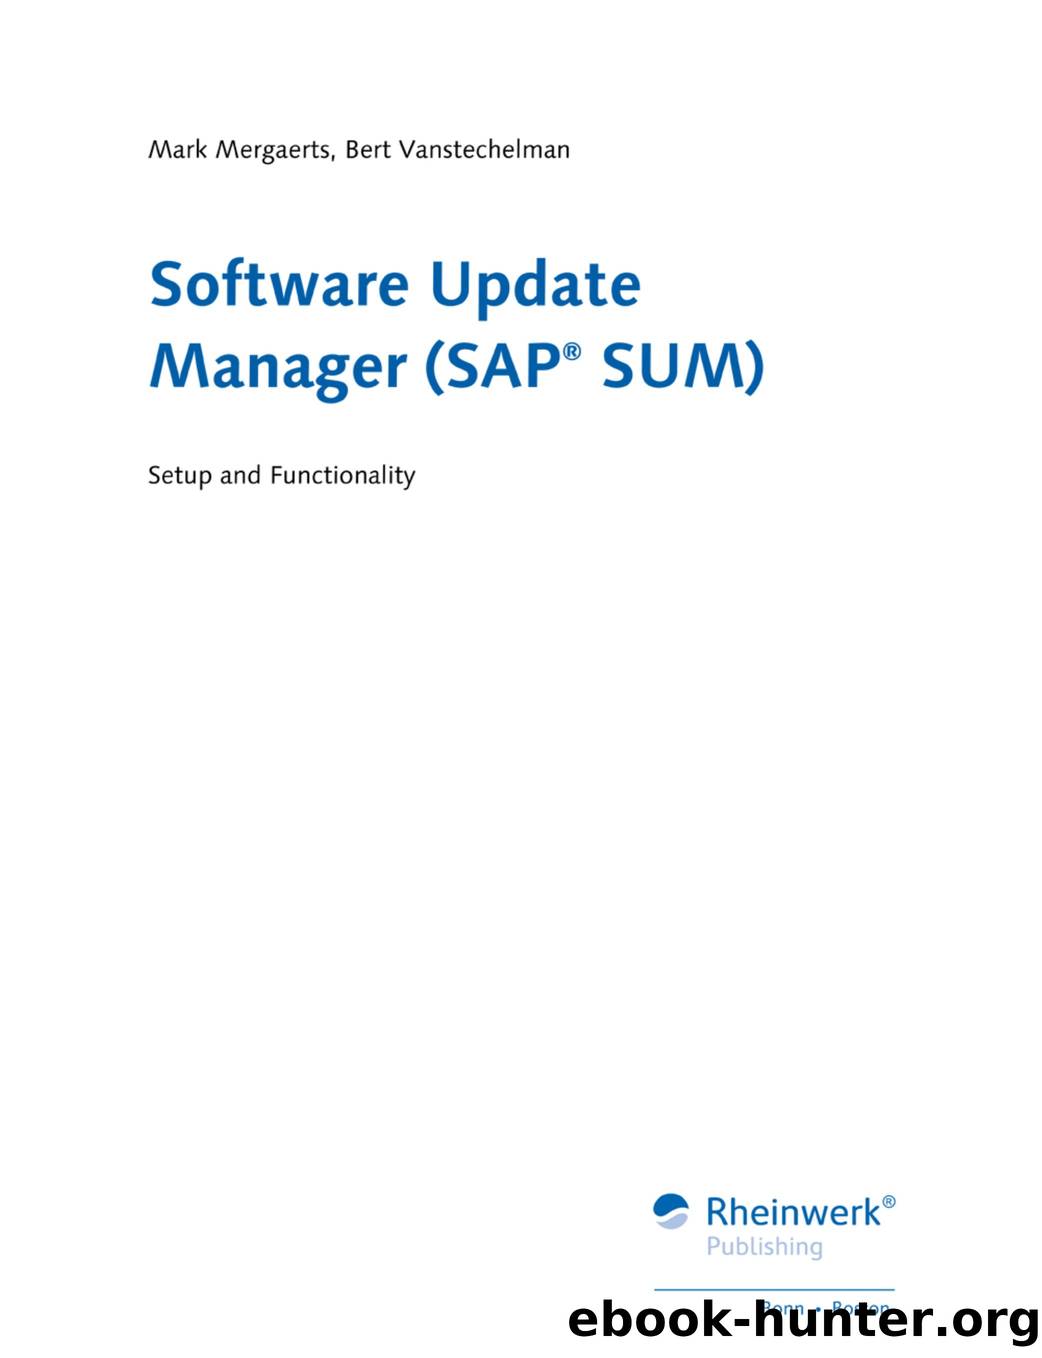 Software Update Manager (SAP SUM) by Setup & Functionality